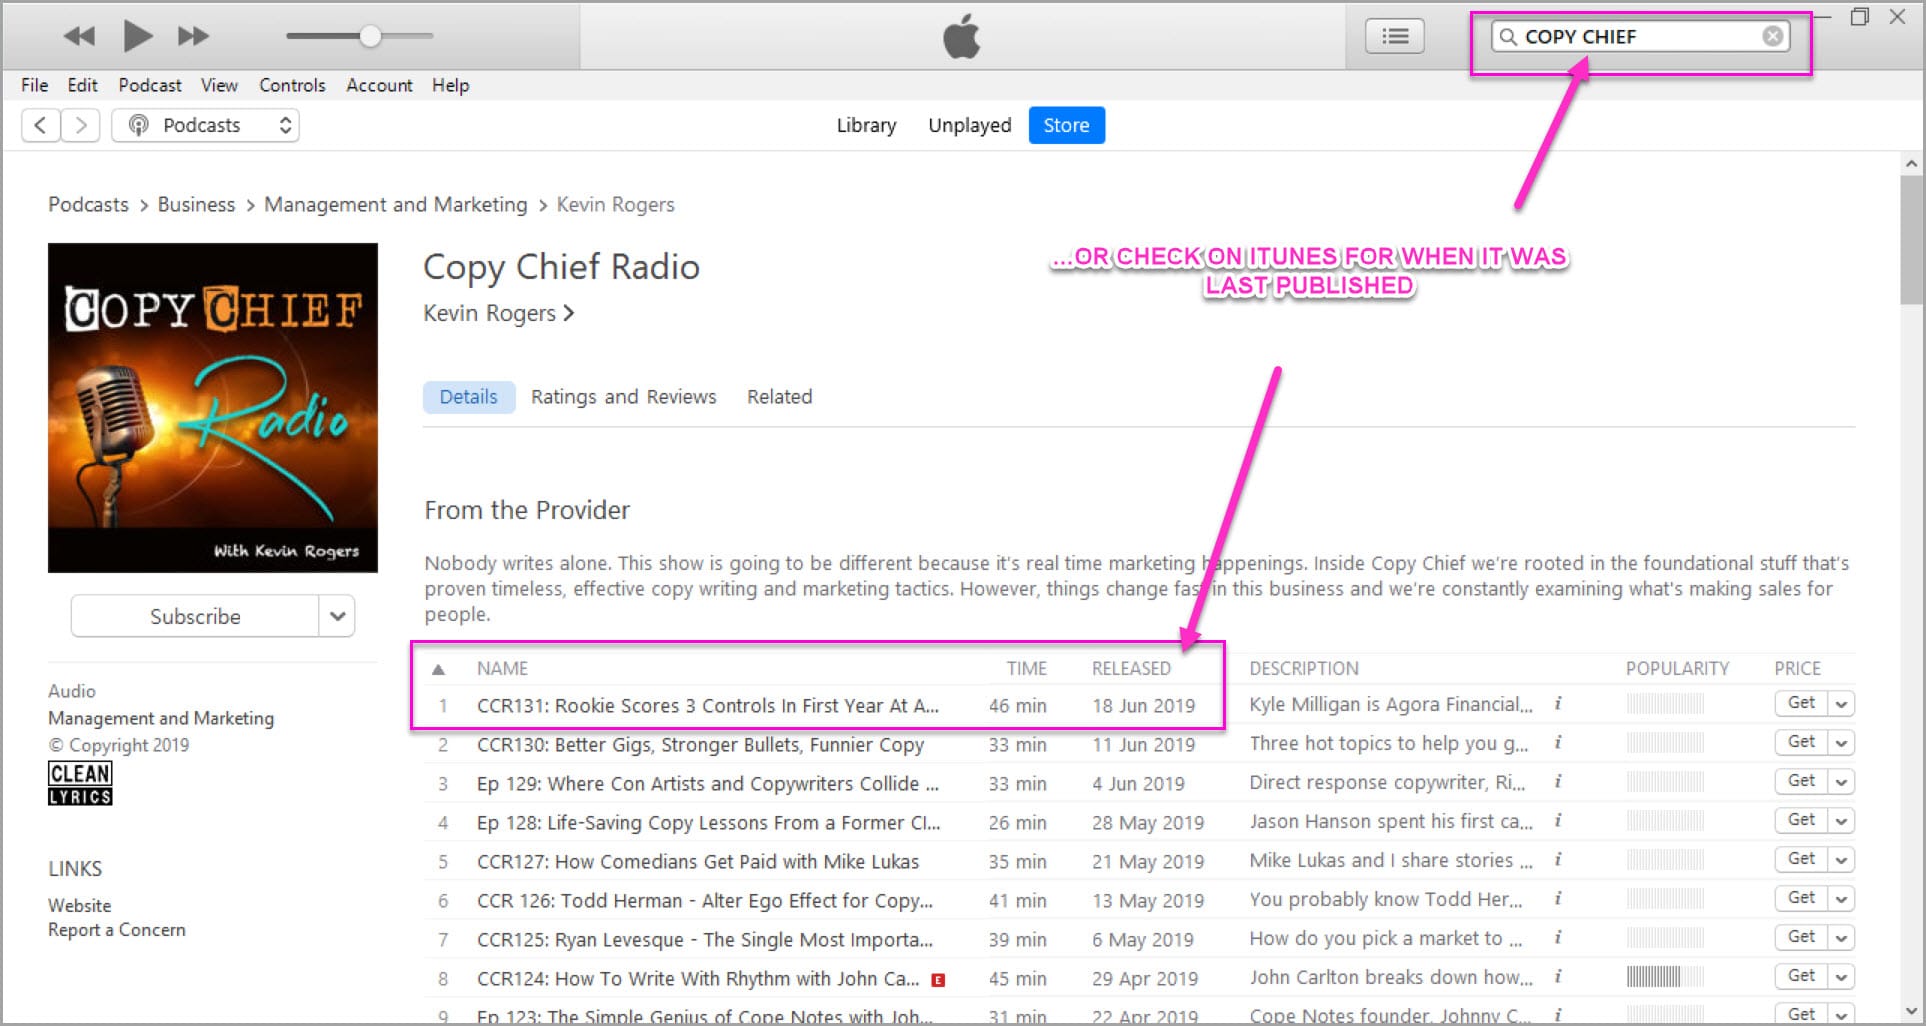 Check itunes to see if the podcast is live, before you pitch them as podcast guest!